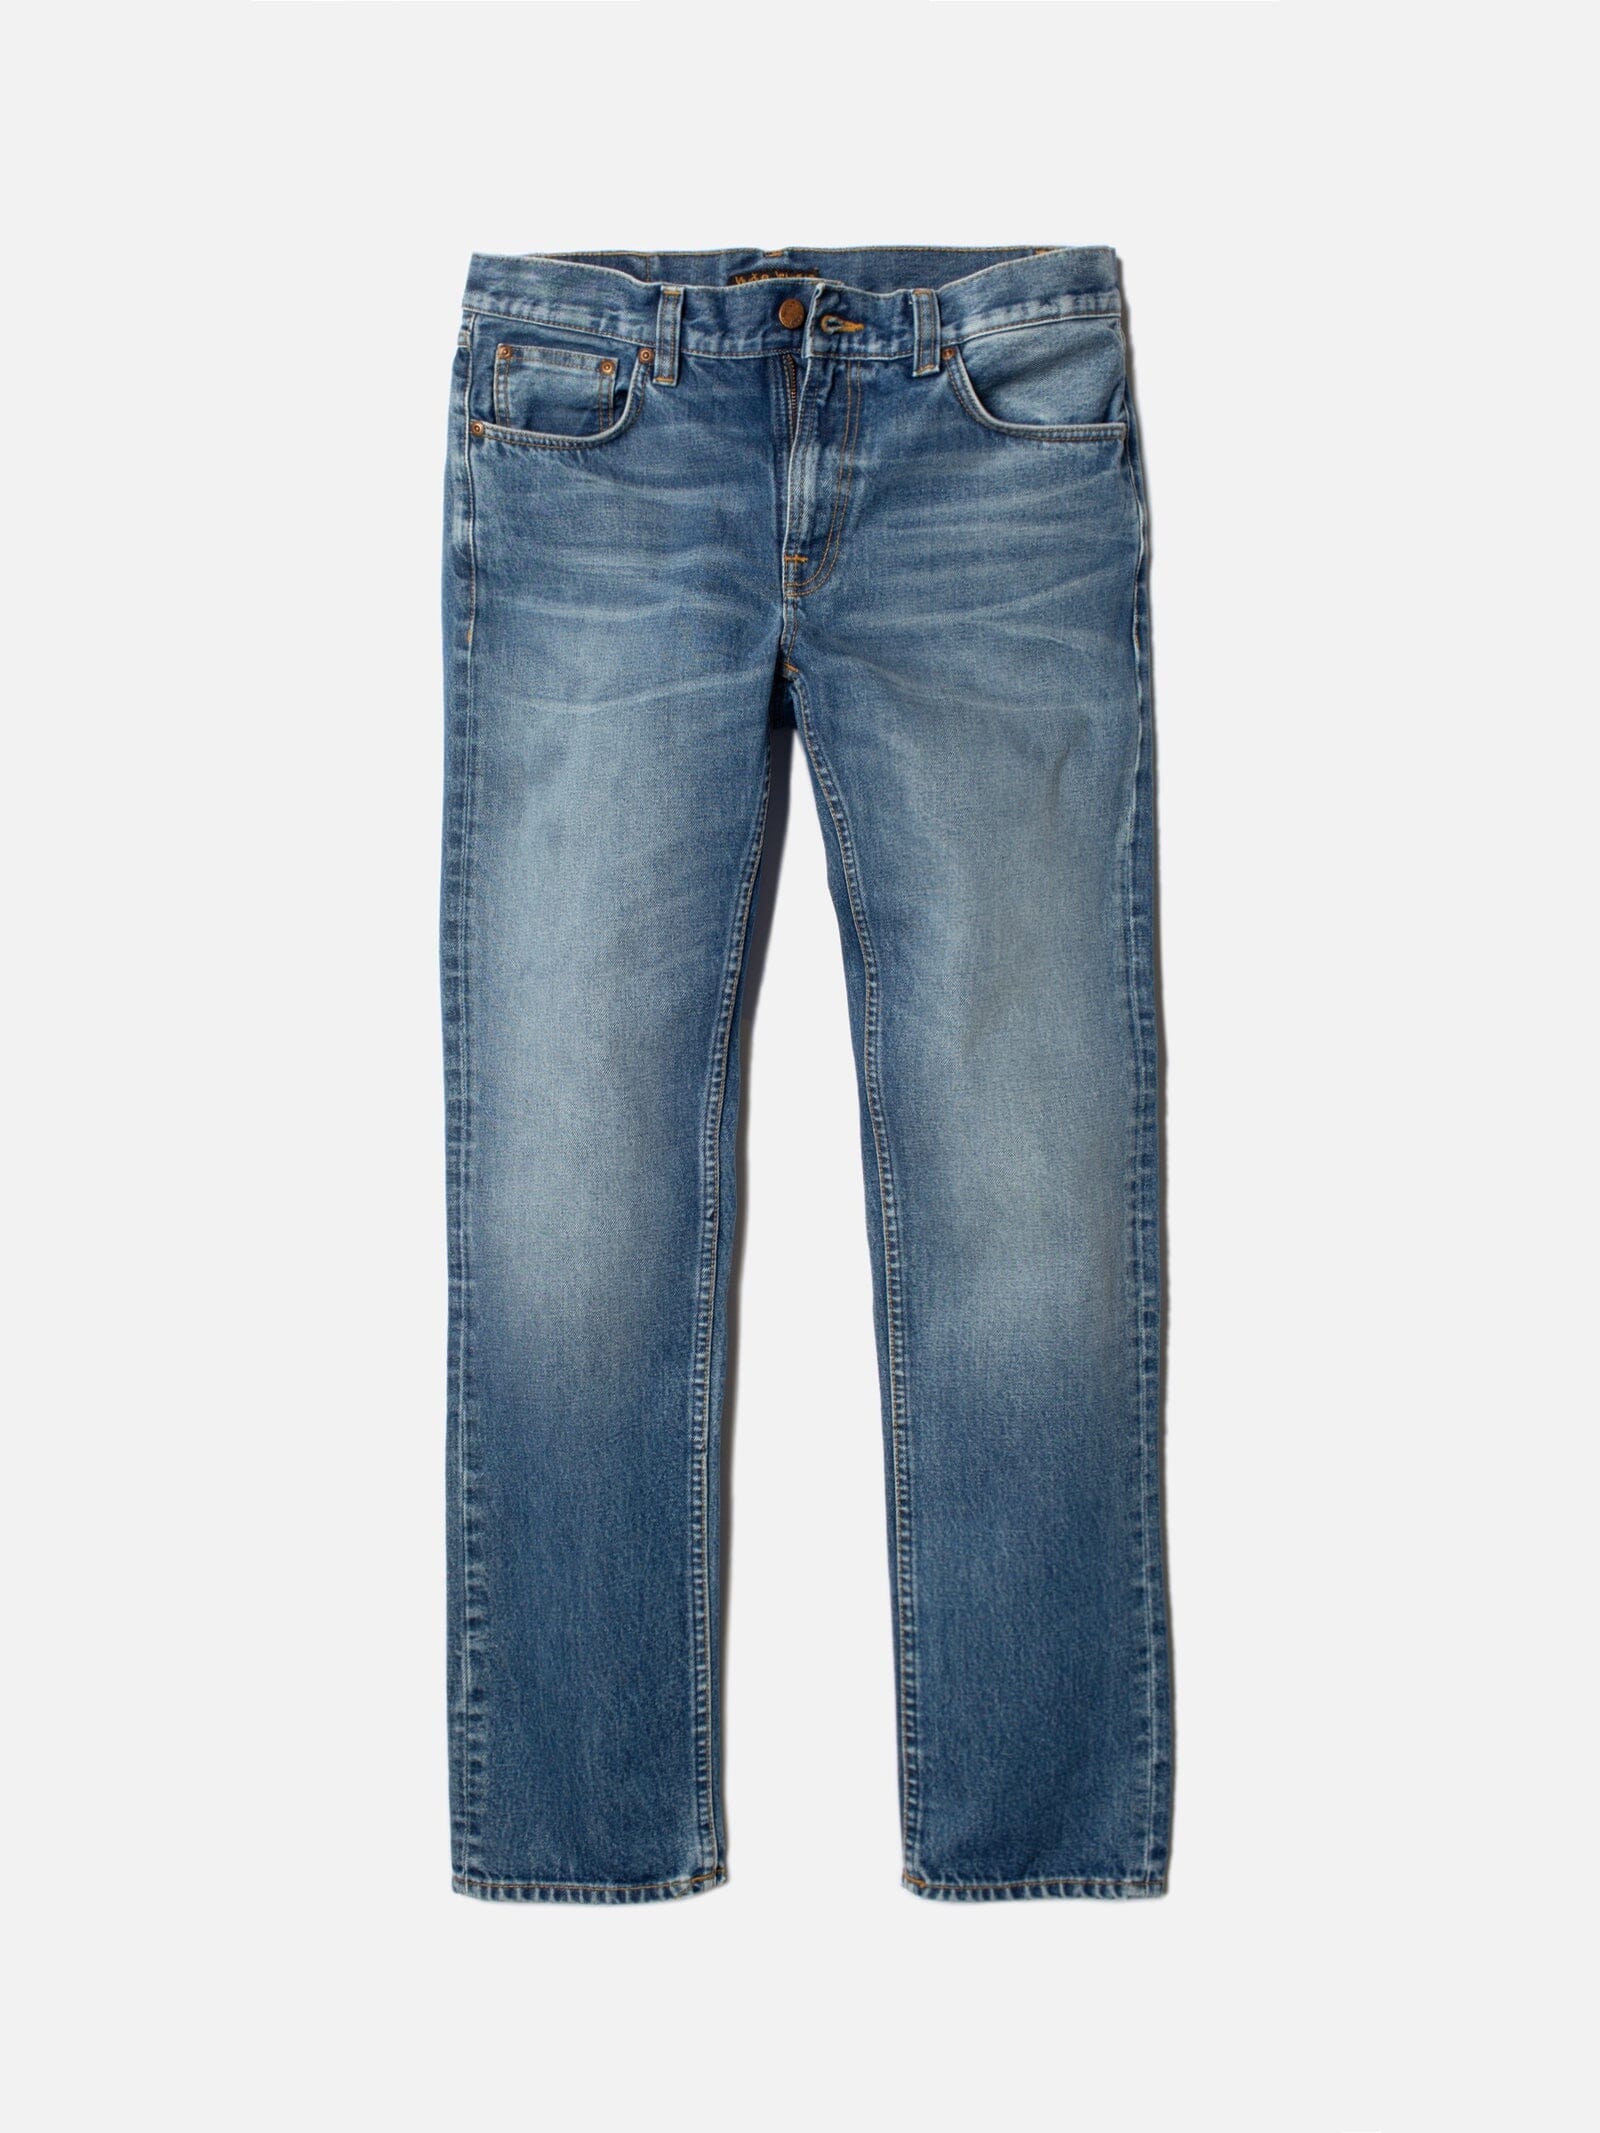 Nudie Jeans Co. - Gritty Jackson Blue Traces - City Workshop Men's Supply Co.